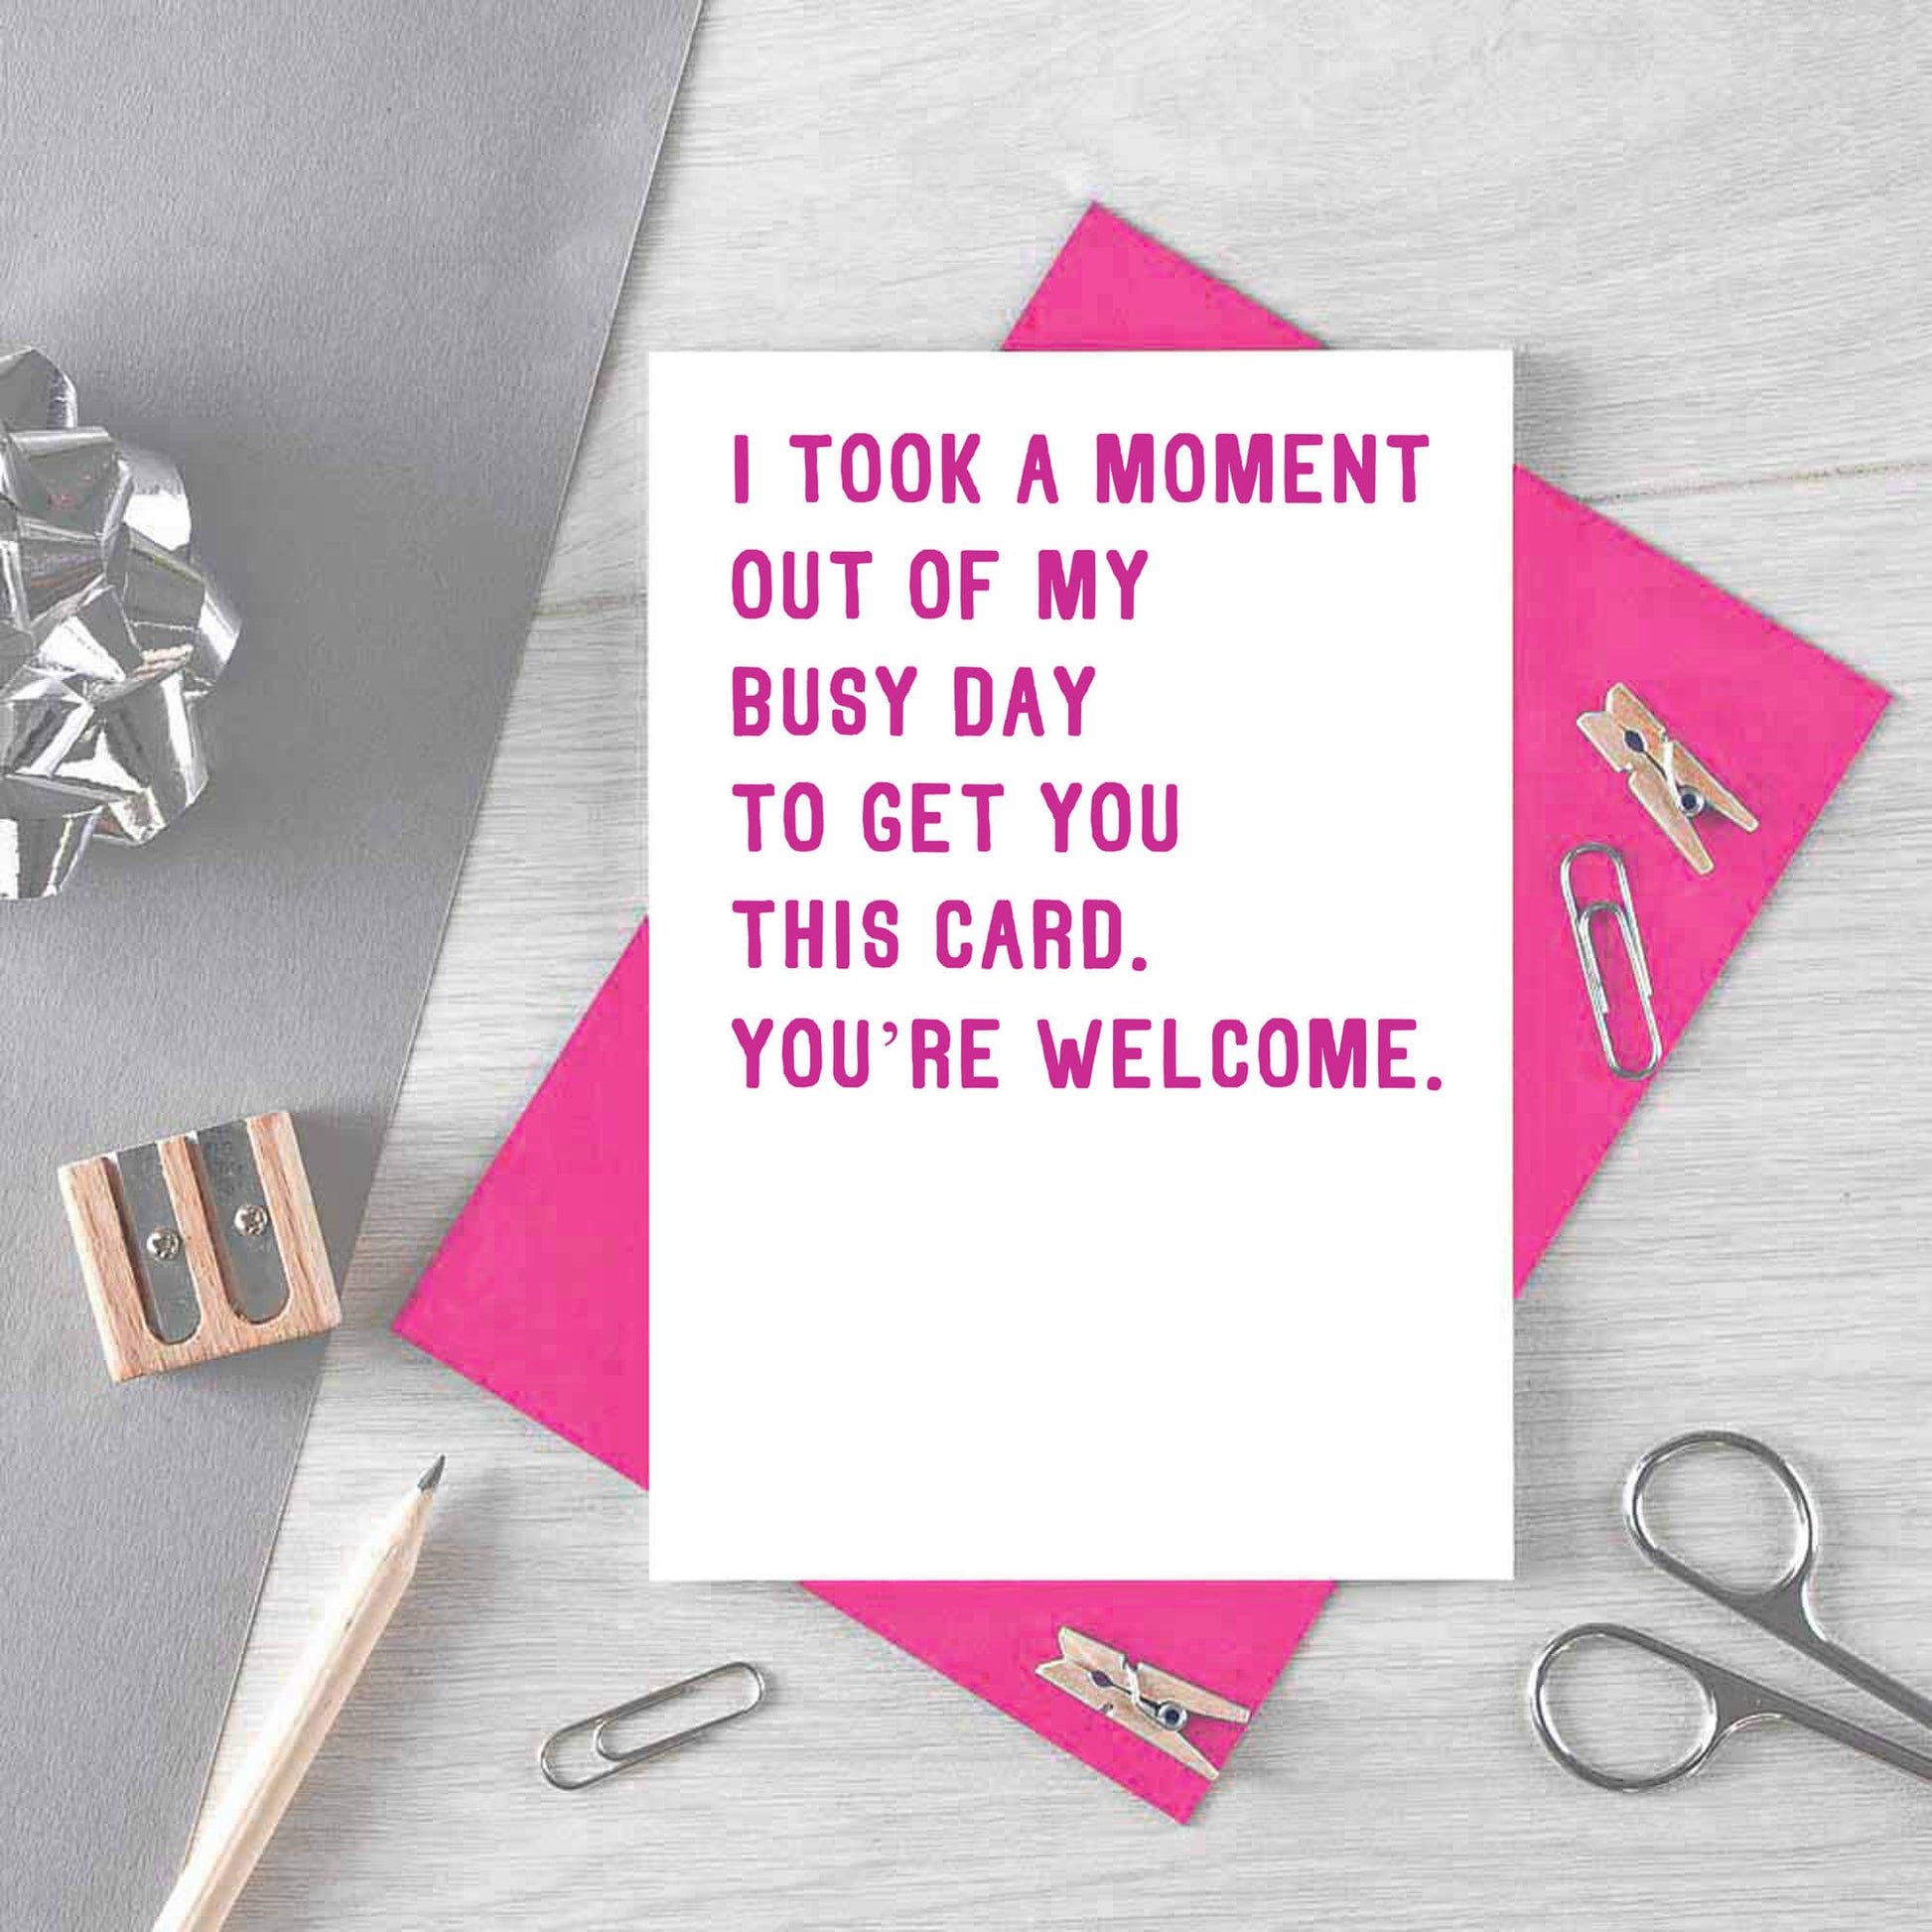 Funny Card by SixElevenCreations. Reads I took a moment out of my busy day to get you this card. You're welcome. Product Code SE2011A6